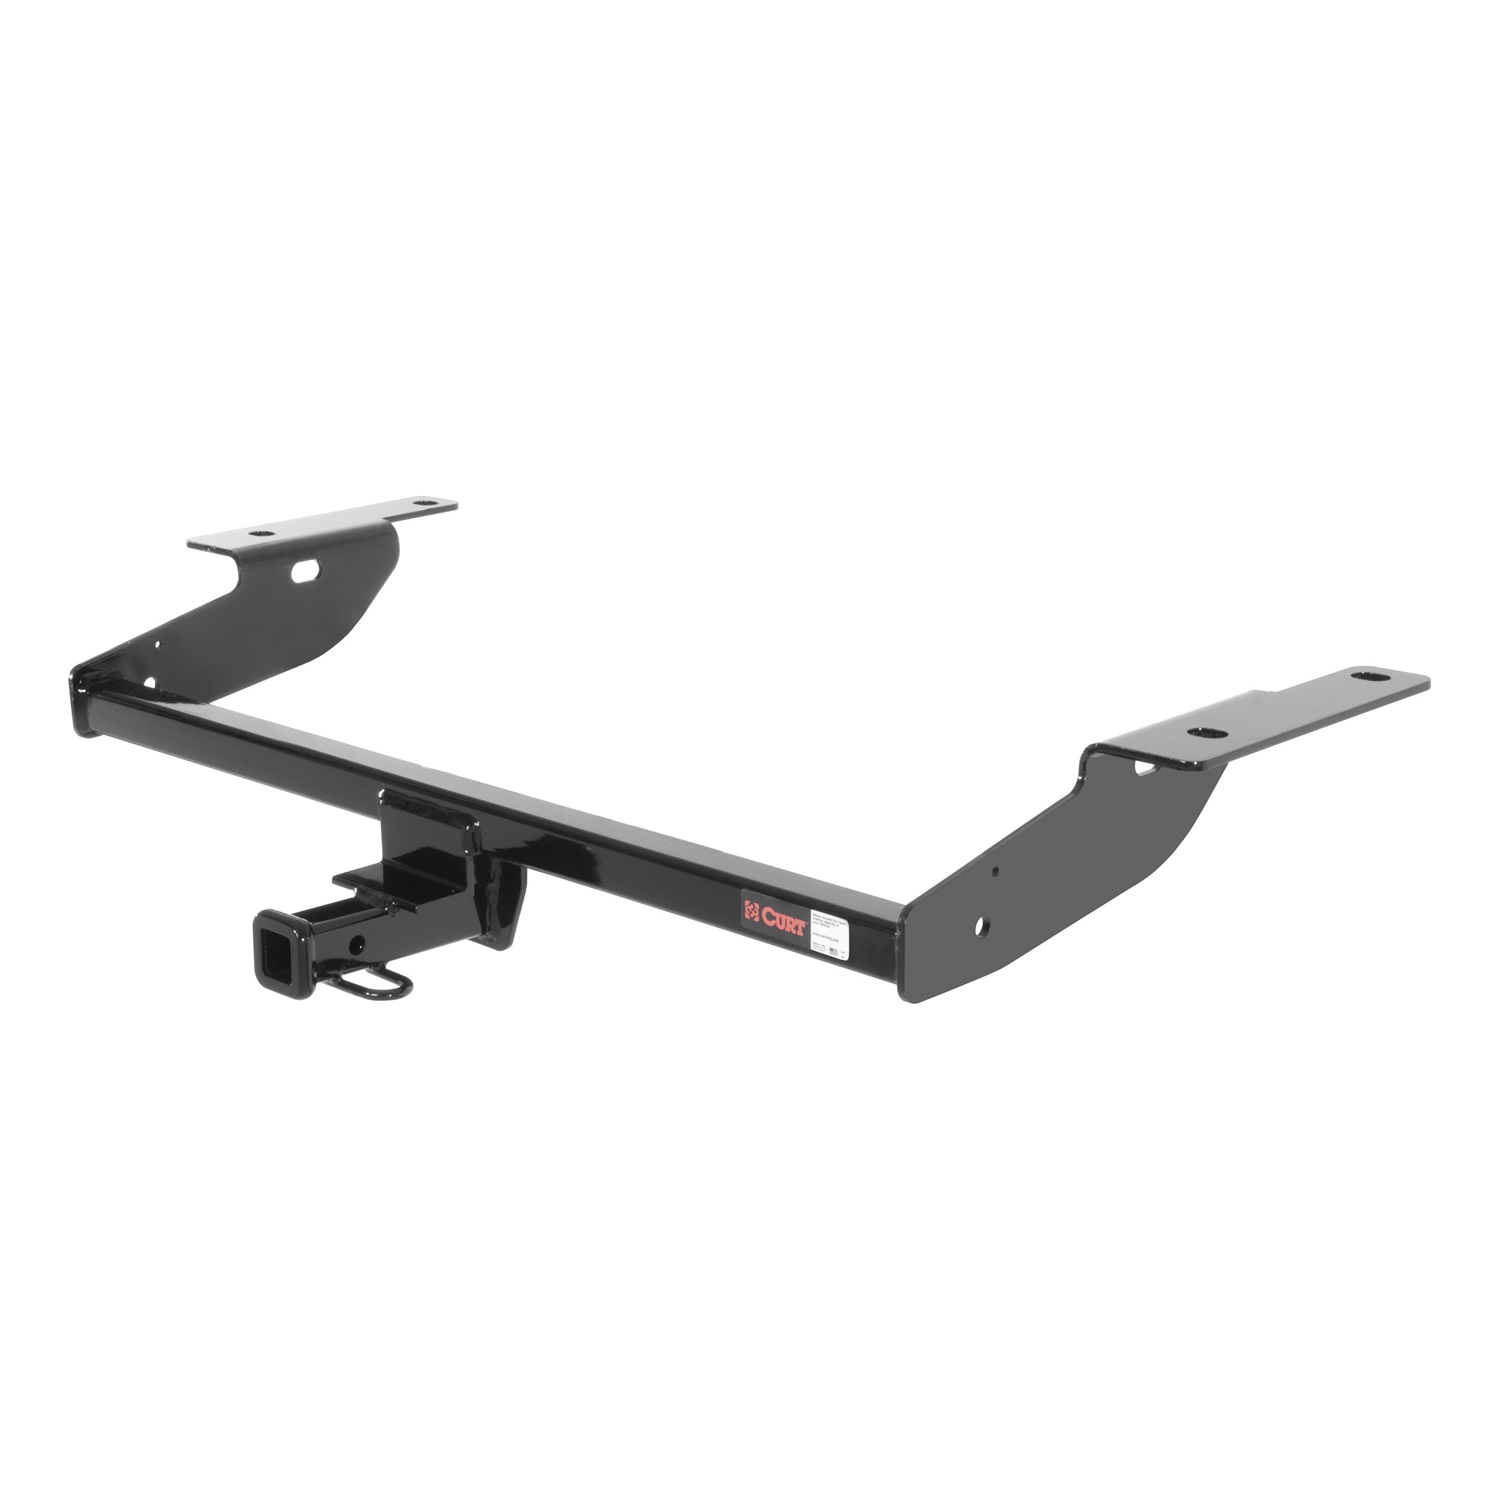 CURT Class 1 Trailer Hitch, includes installation hardware, pin & clip - image 1 of 5